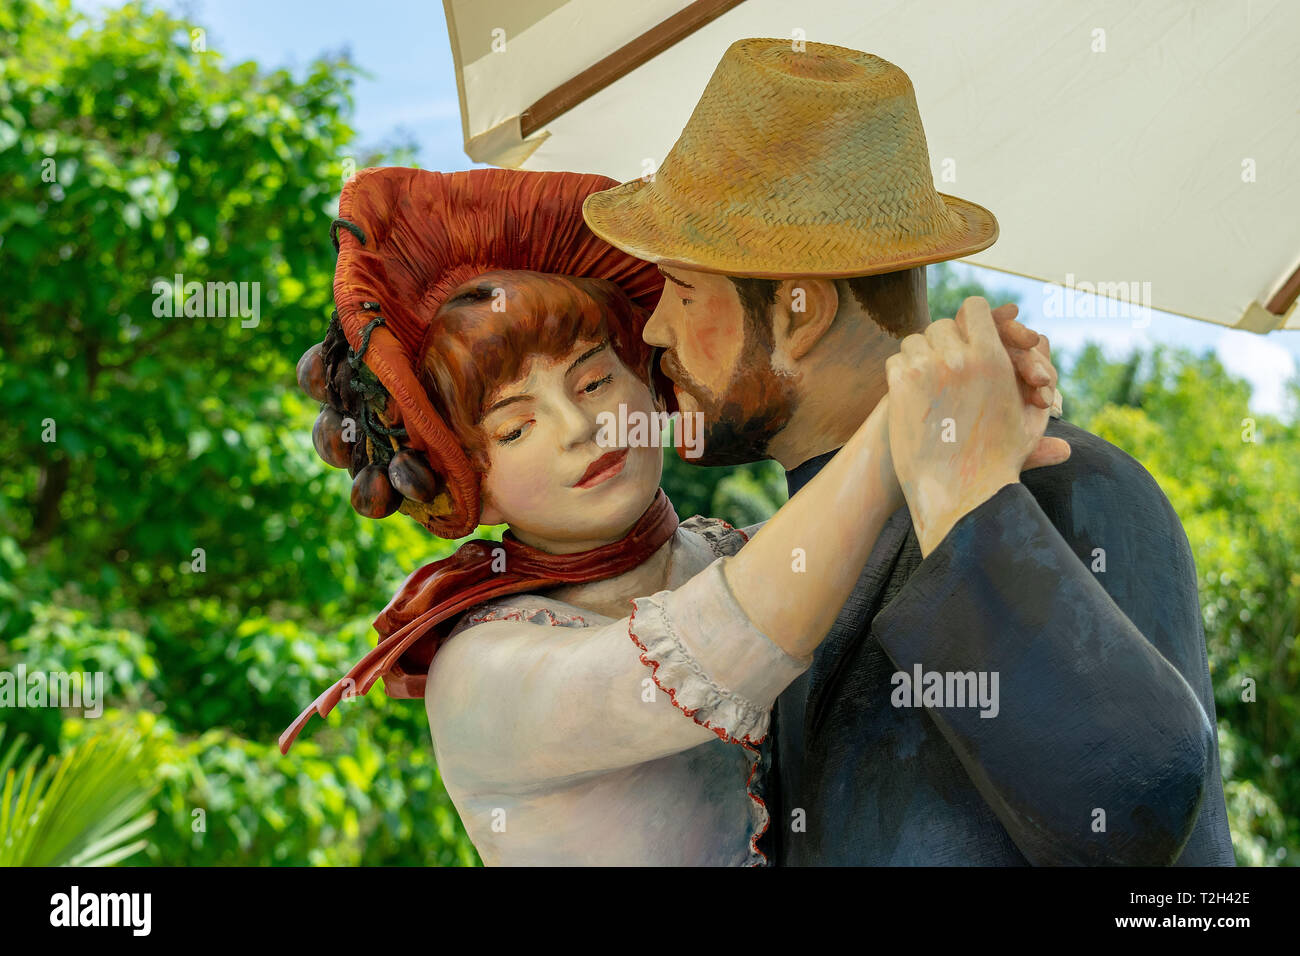 A statue depicting a couple dancing in an intimate embrace which was modelled on a Renoir painting Stock Photo